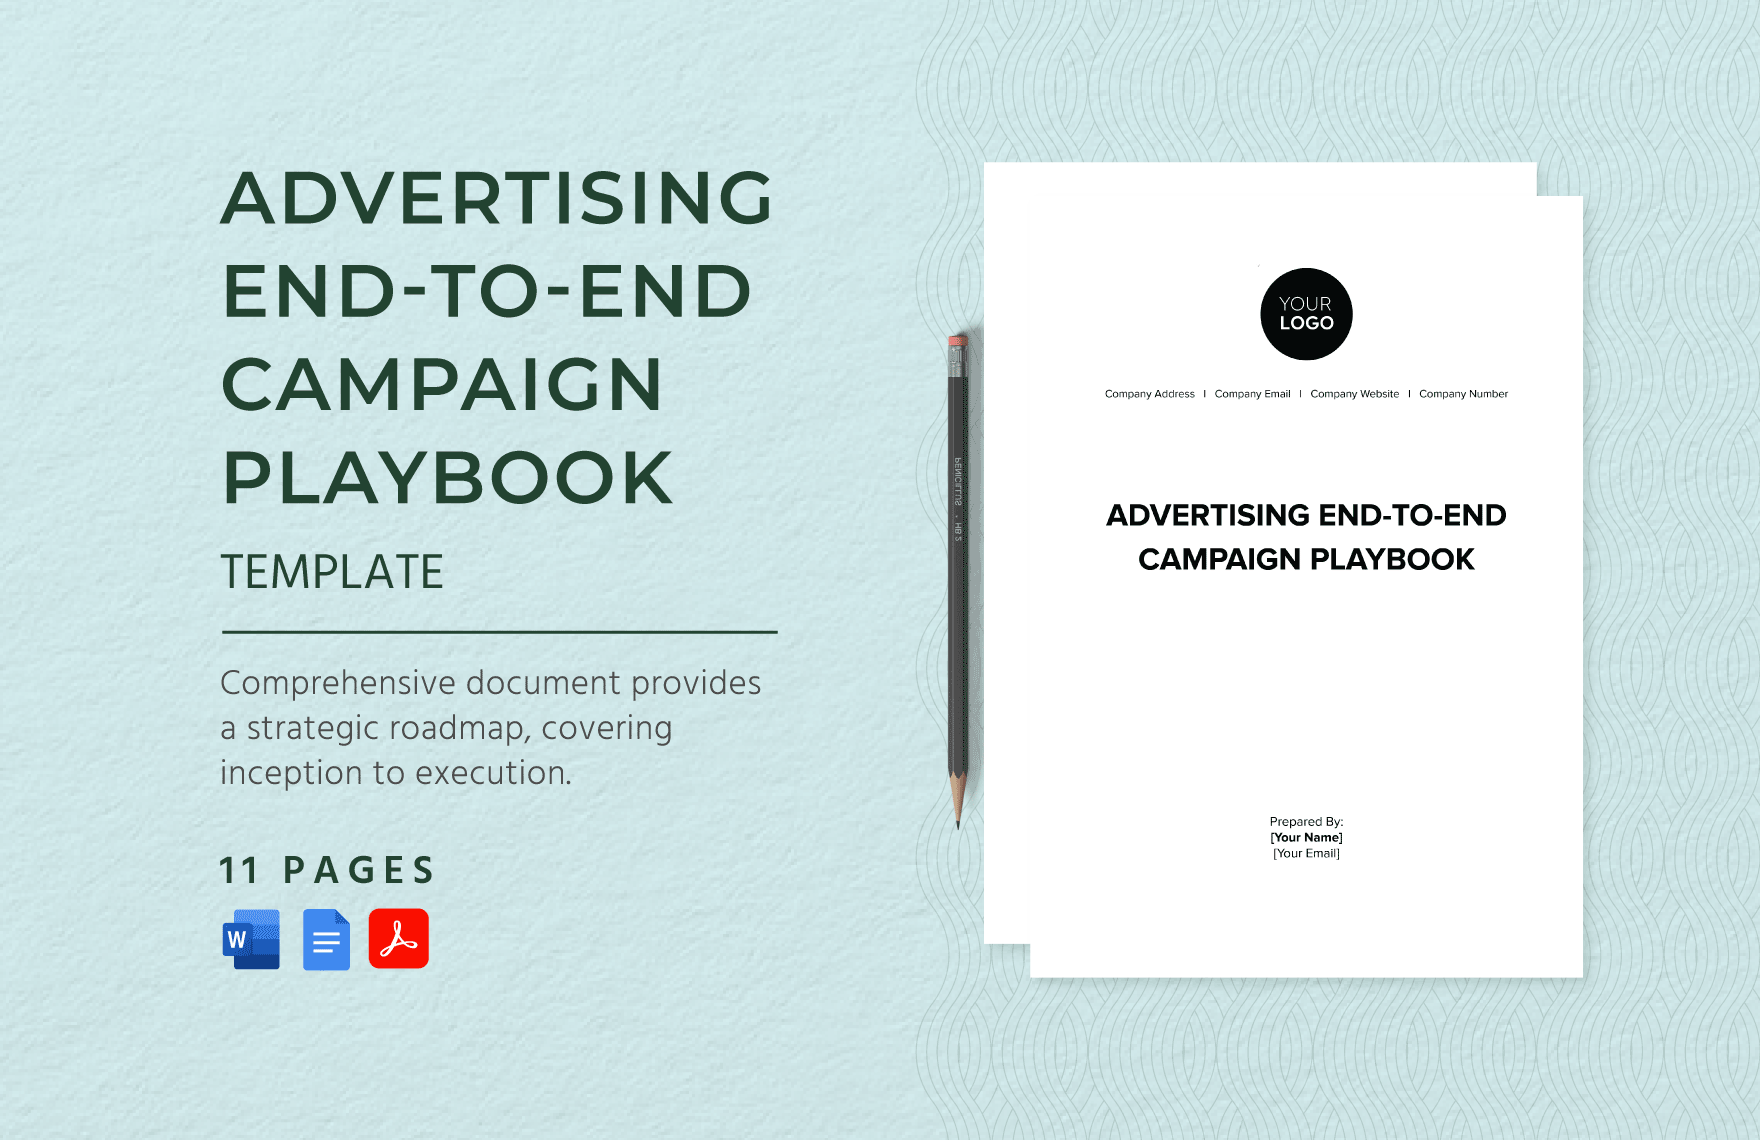 Advertising End-to-End Campaign Playbook Template in Word, Google Docs, PDF